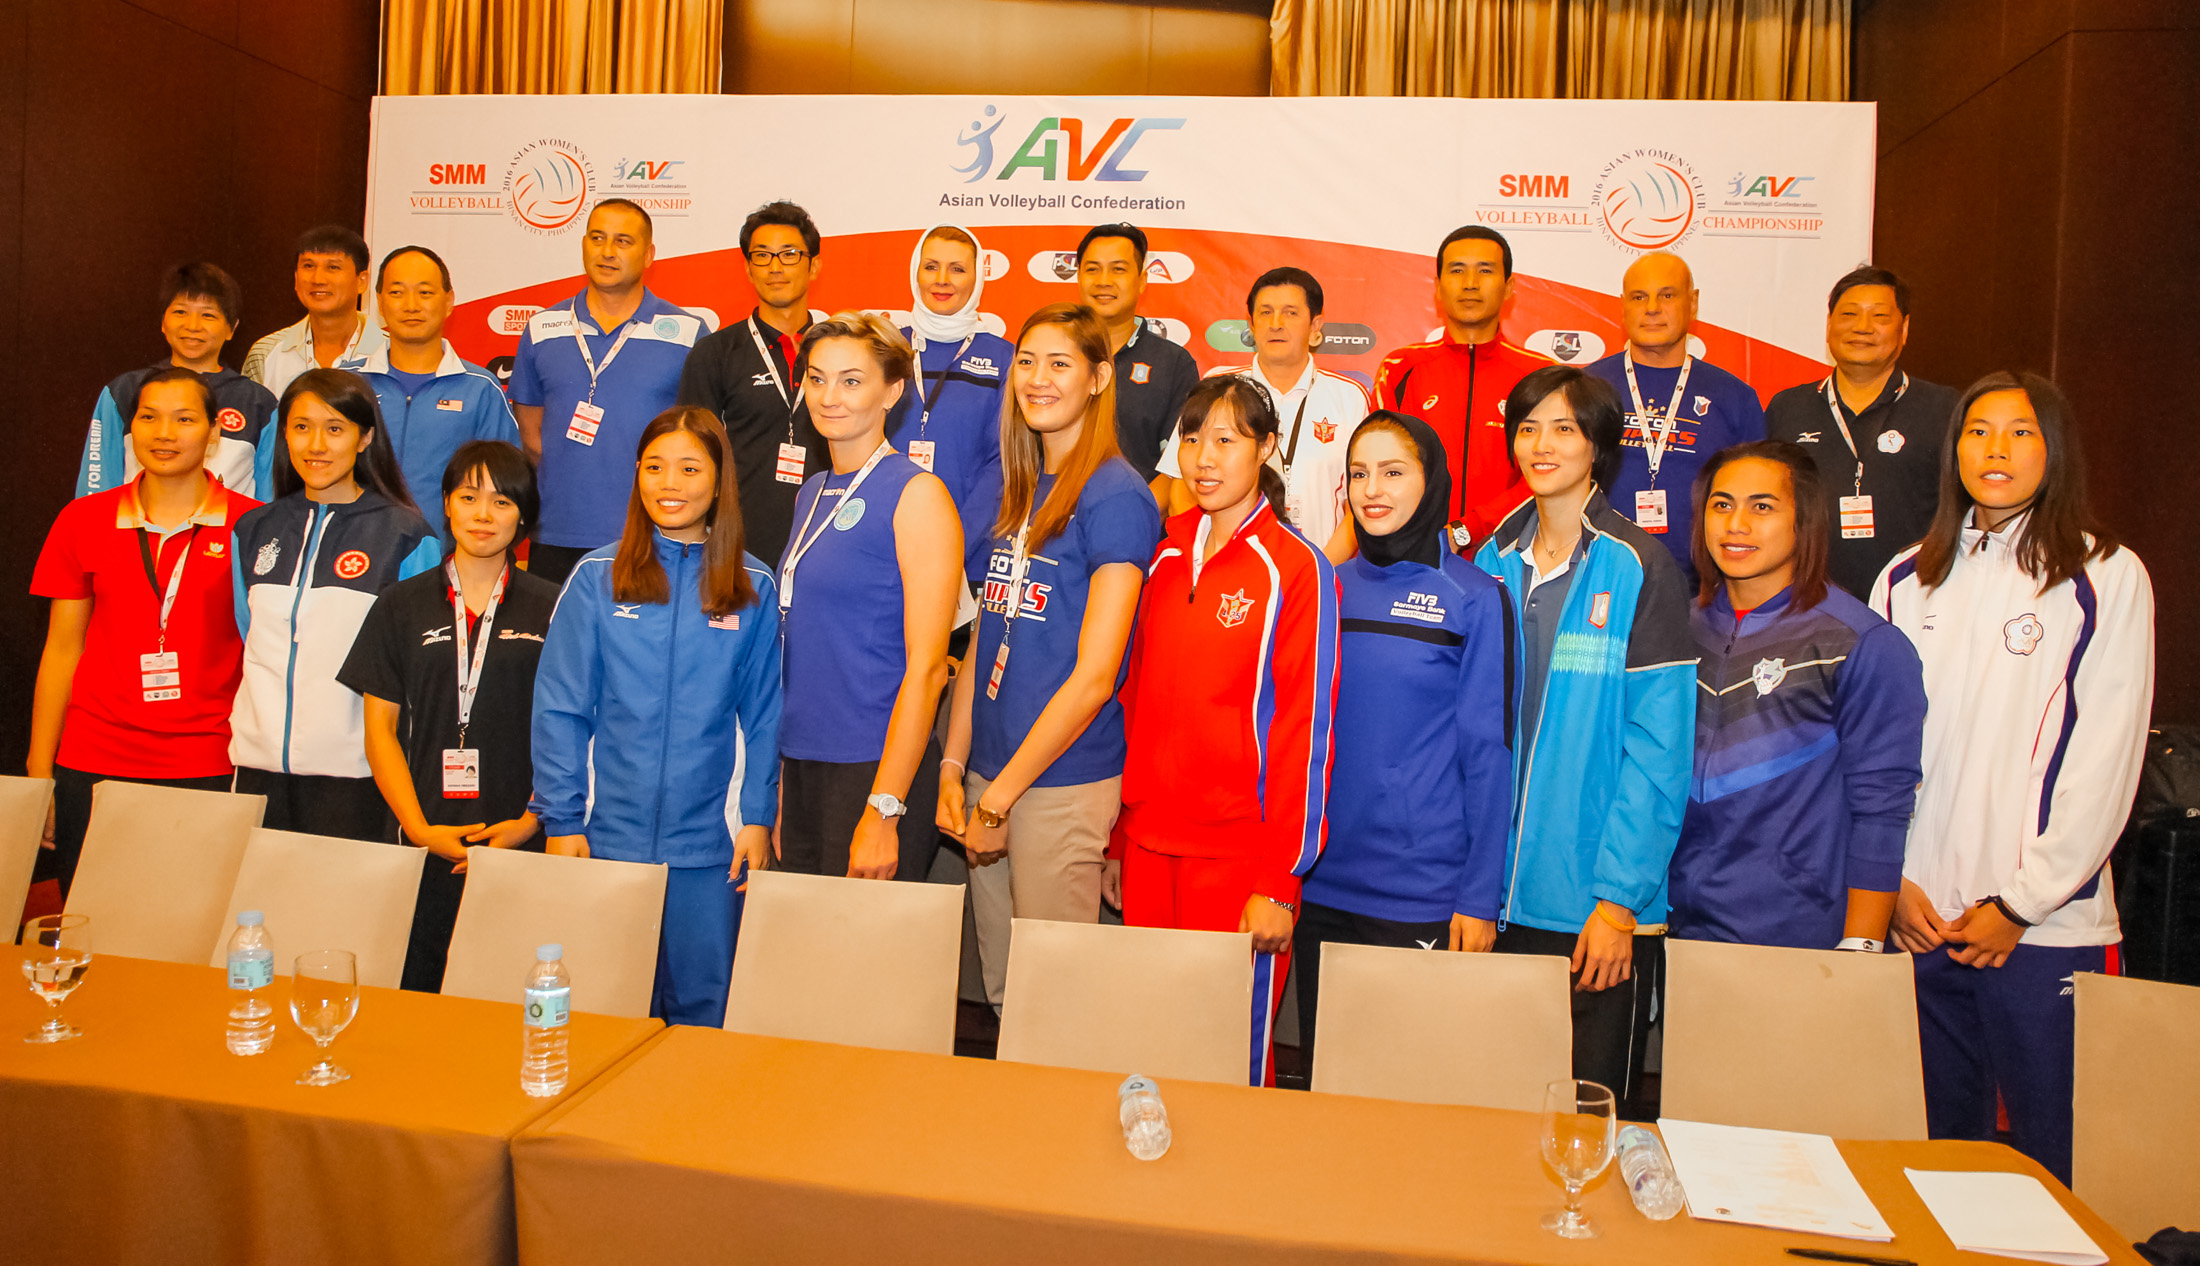 Thai coach says PH, China, Japan teams to beat in AVC tilt | Inquirer ...